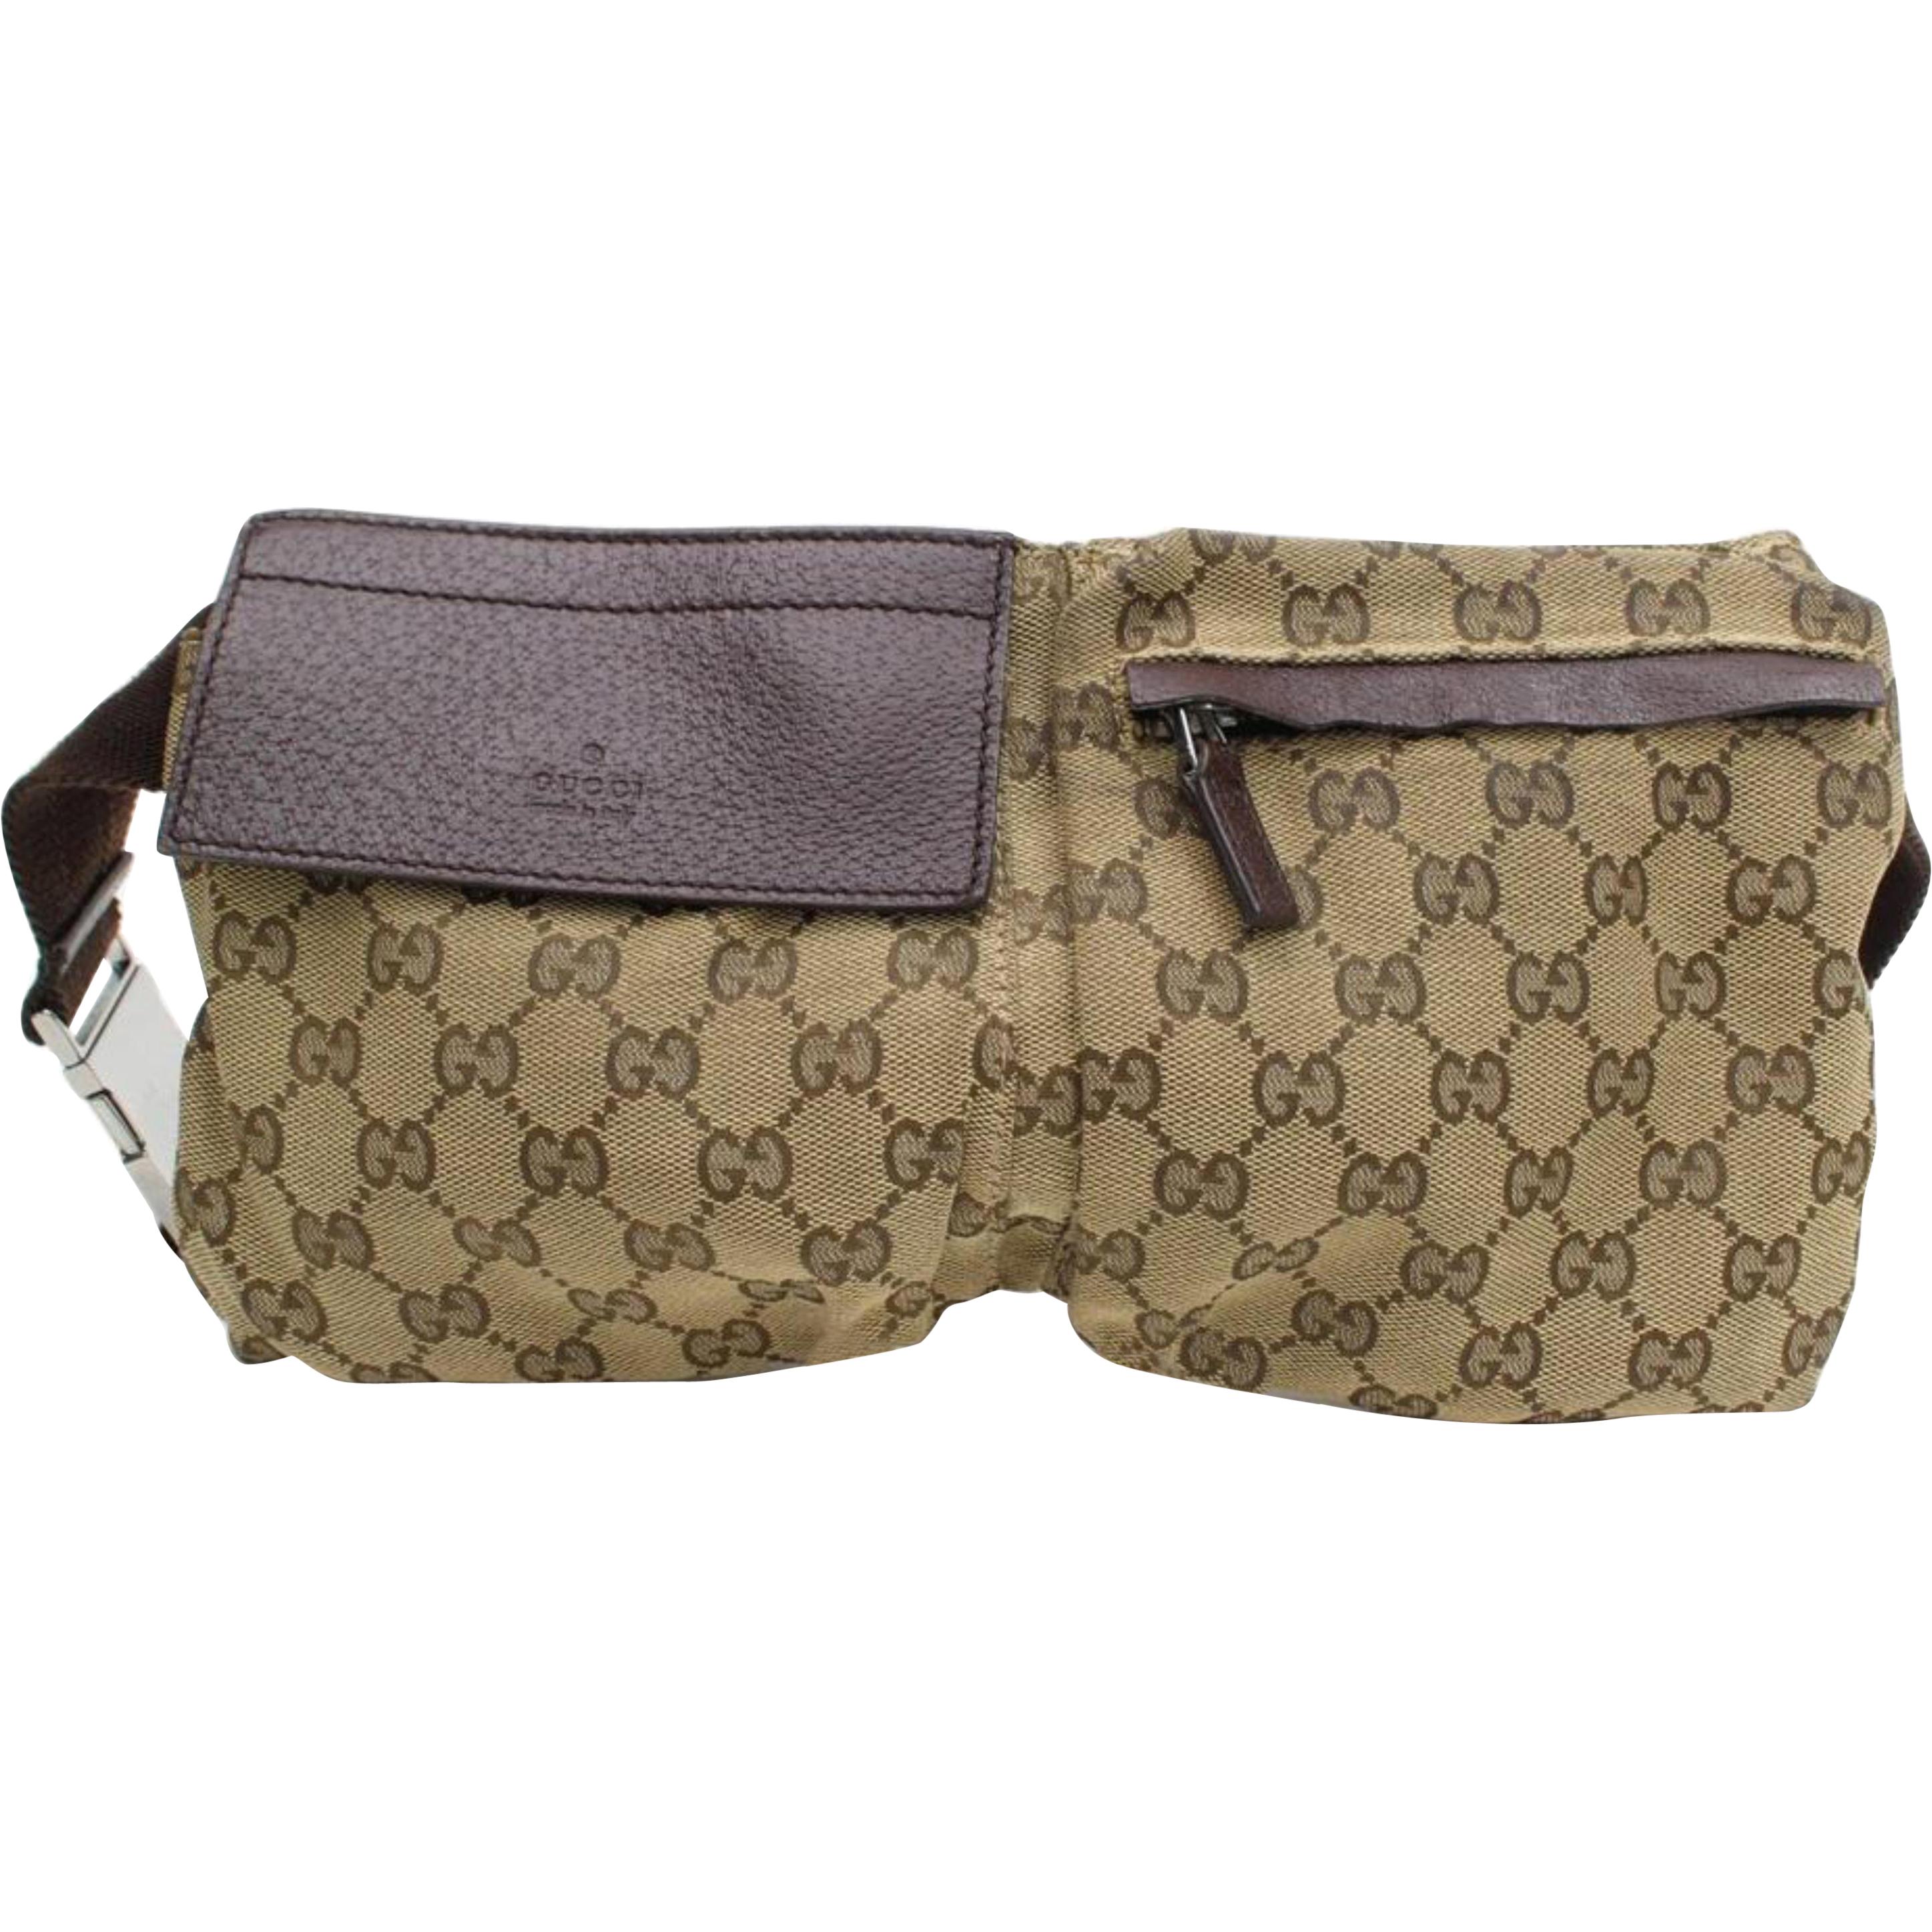 Gucci Monogram Gg Waist Pouch Fanny Pack 868298 Brown Canvas Cross Body Bag For Sale